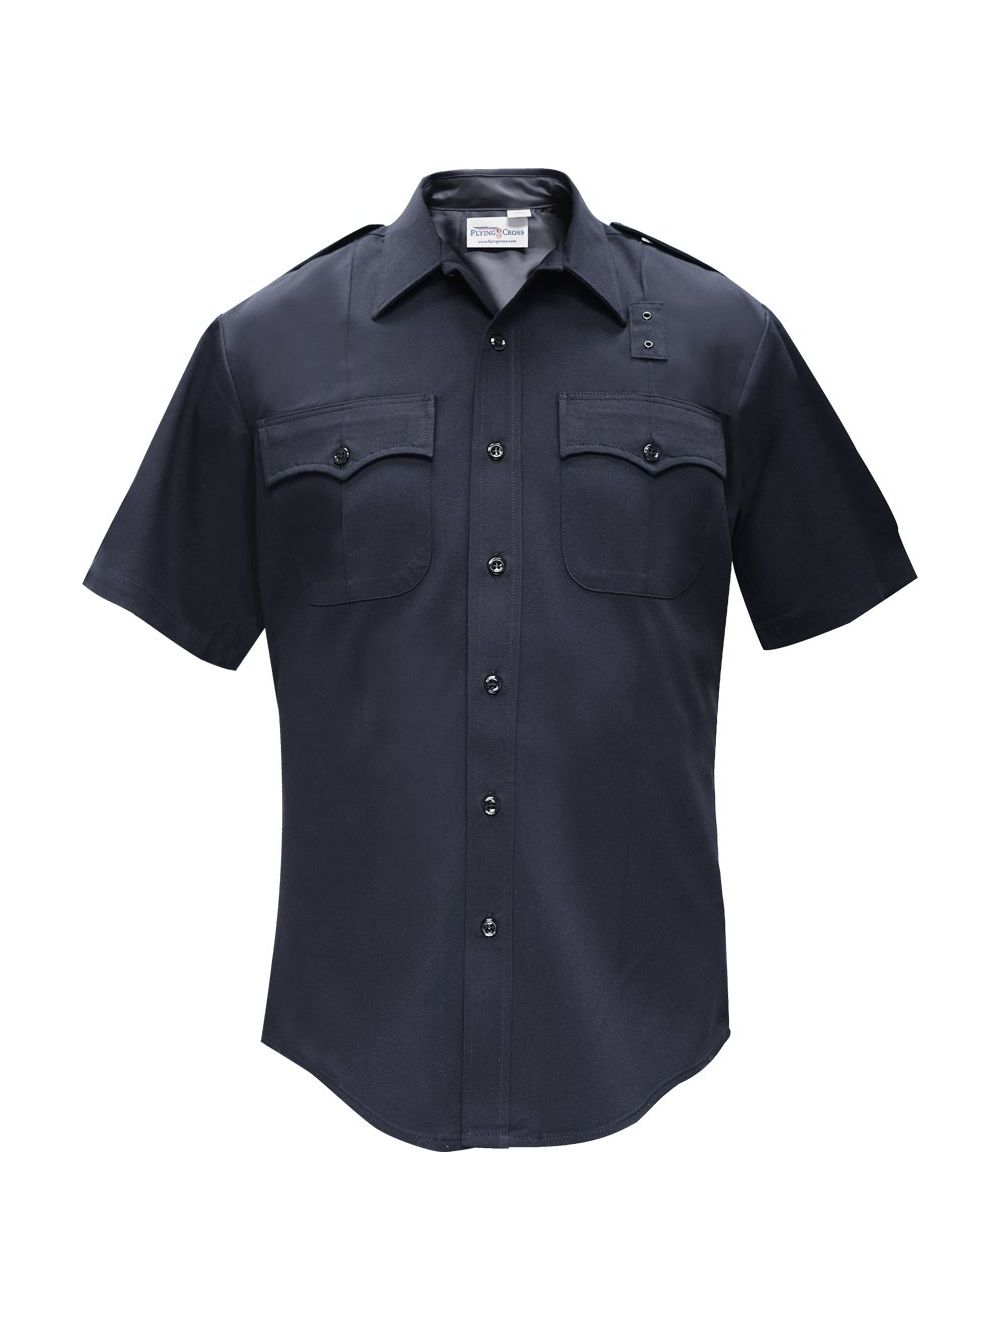 Deluxe Tactical Short Sleeve Shirt w/ Com Ports - LAPD Navy